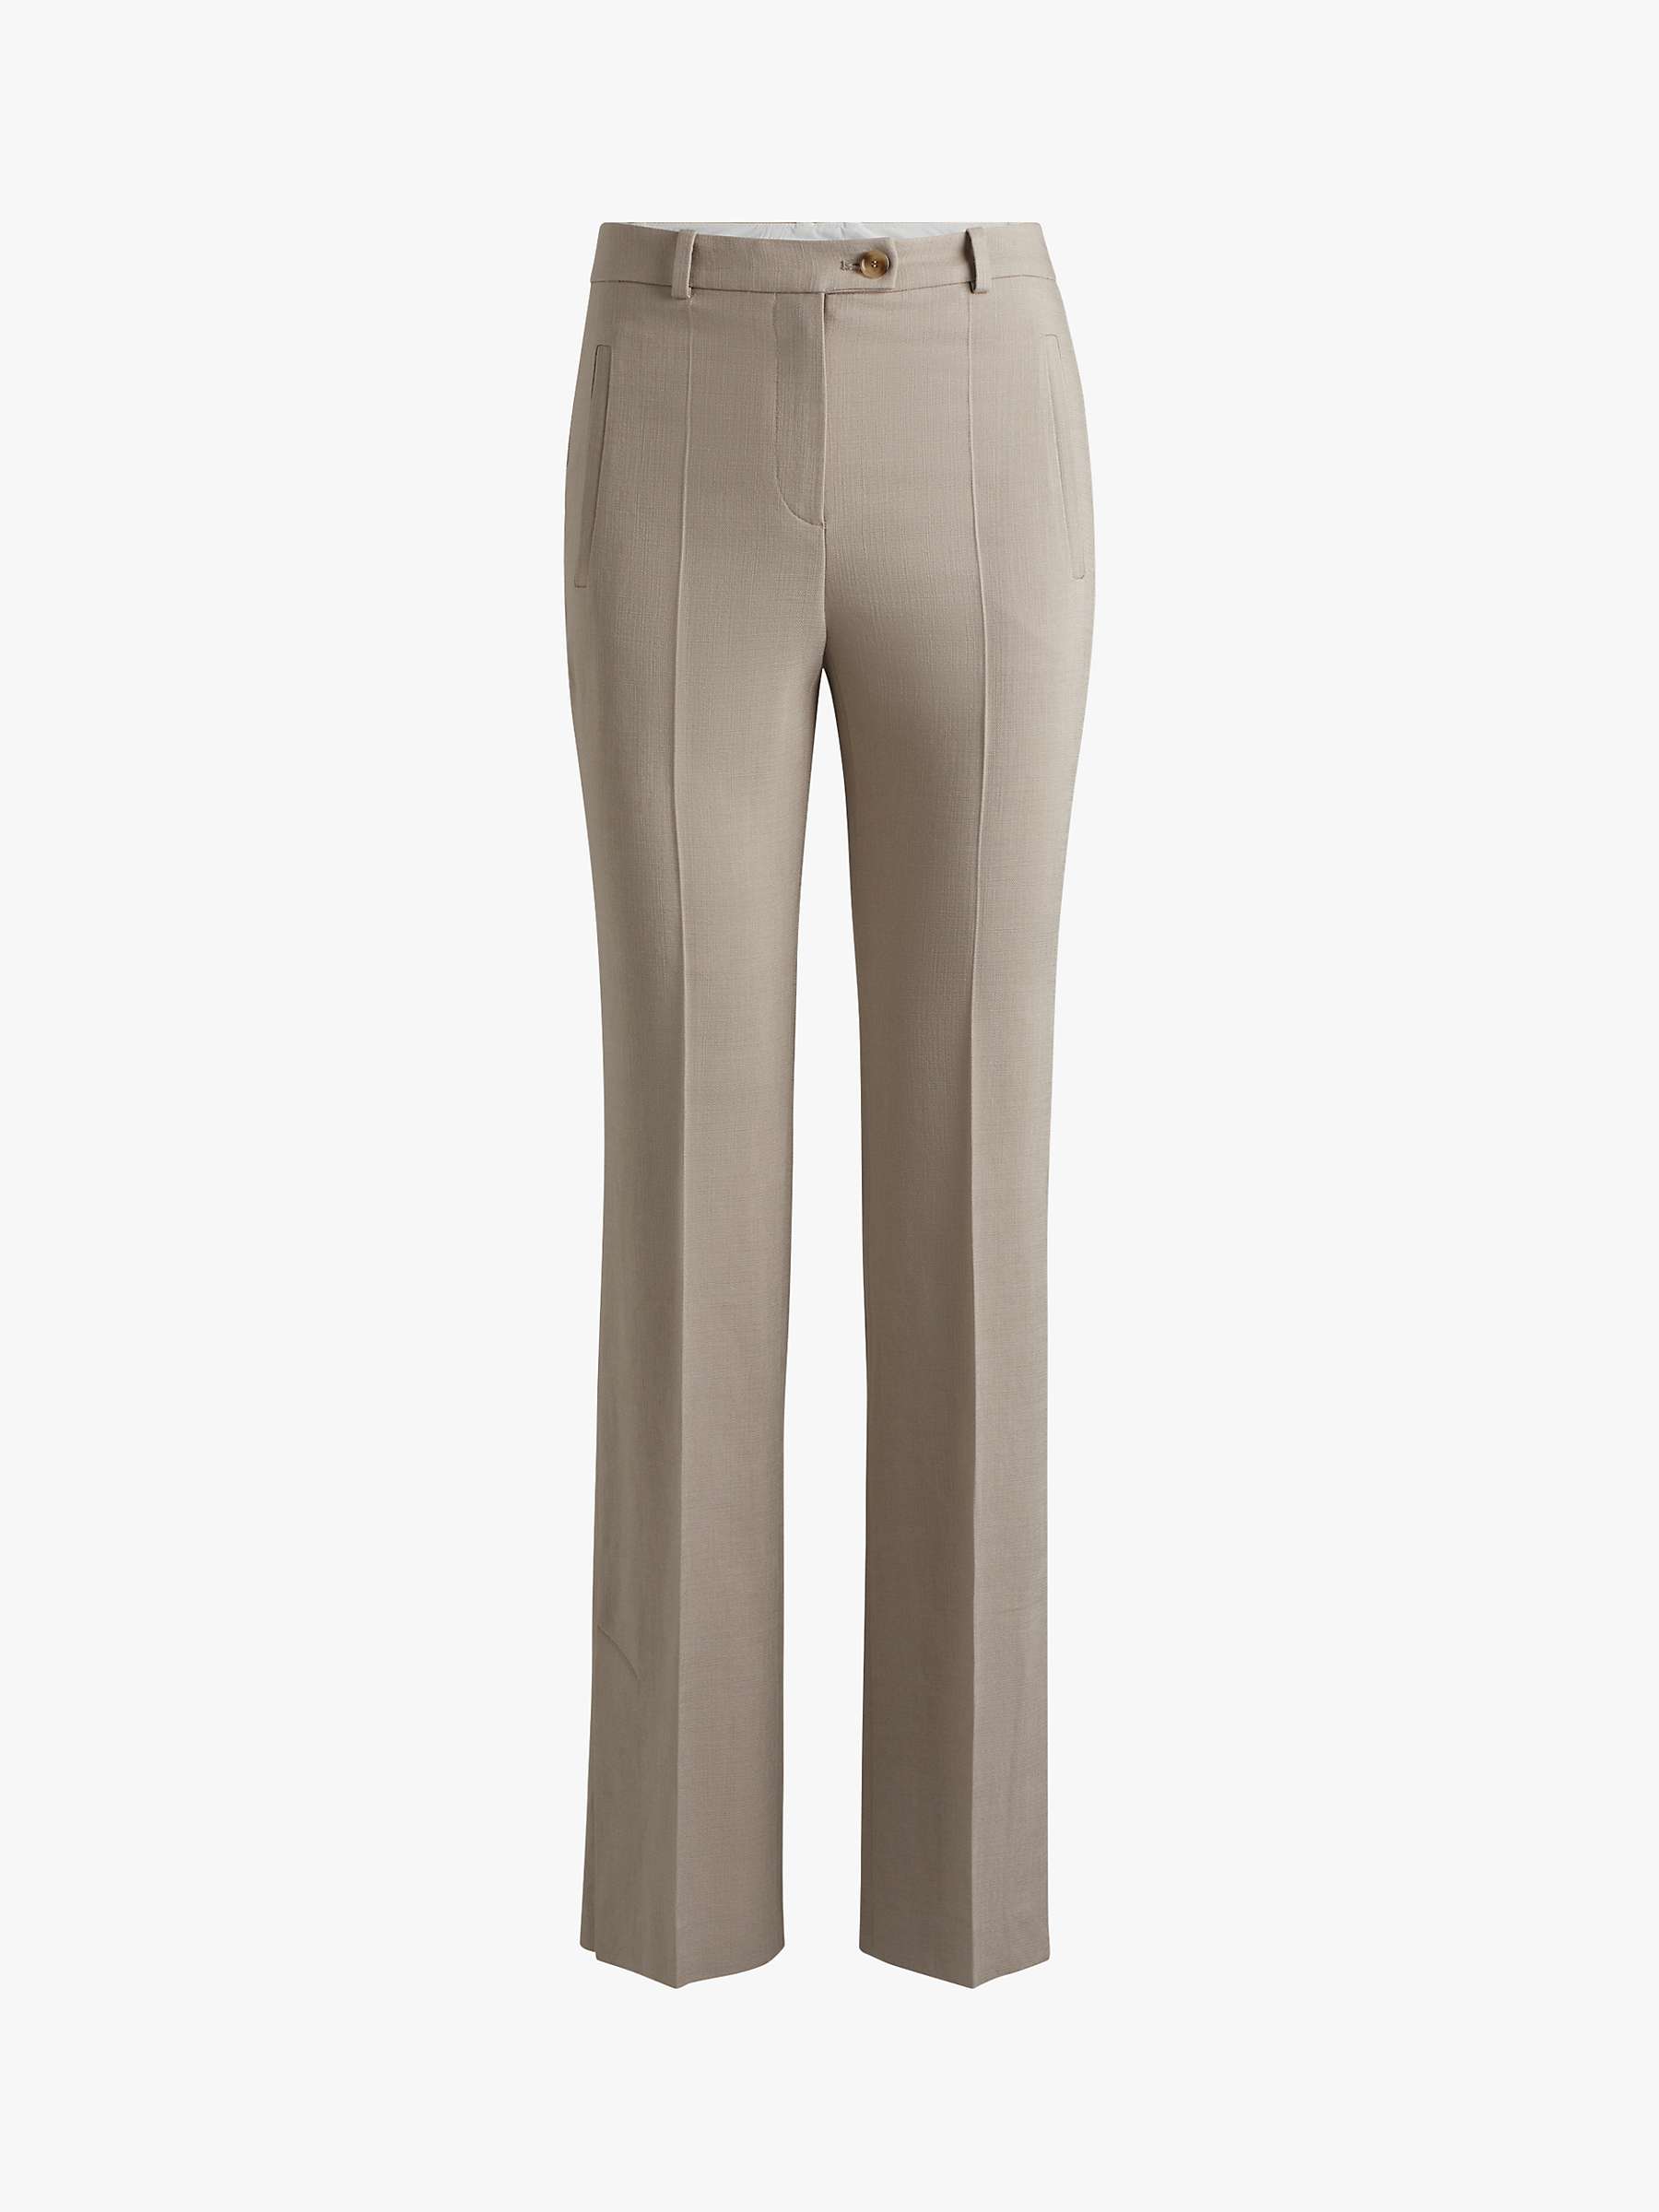 Buy BOSS Terela Tailored Suit Trousers, Taupe Online at johnlewis.com